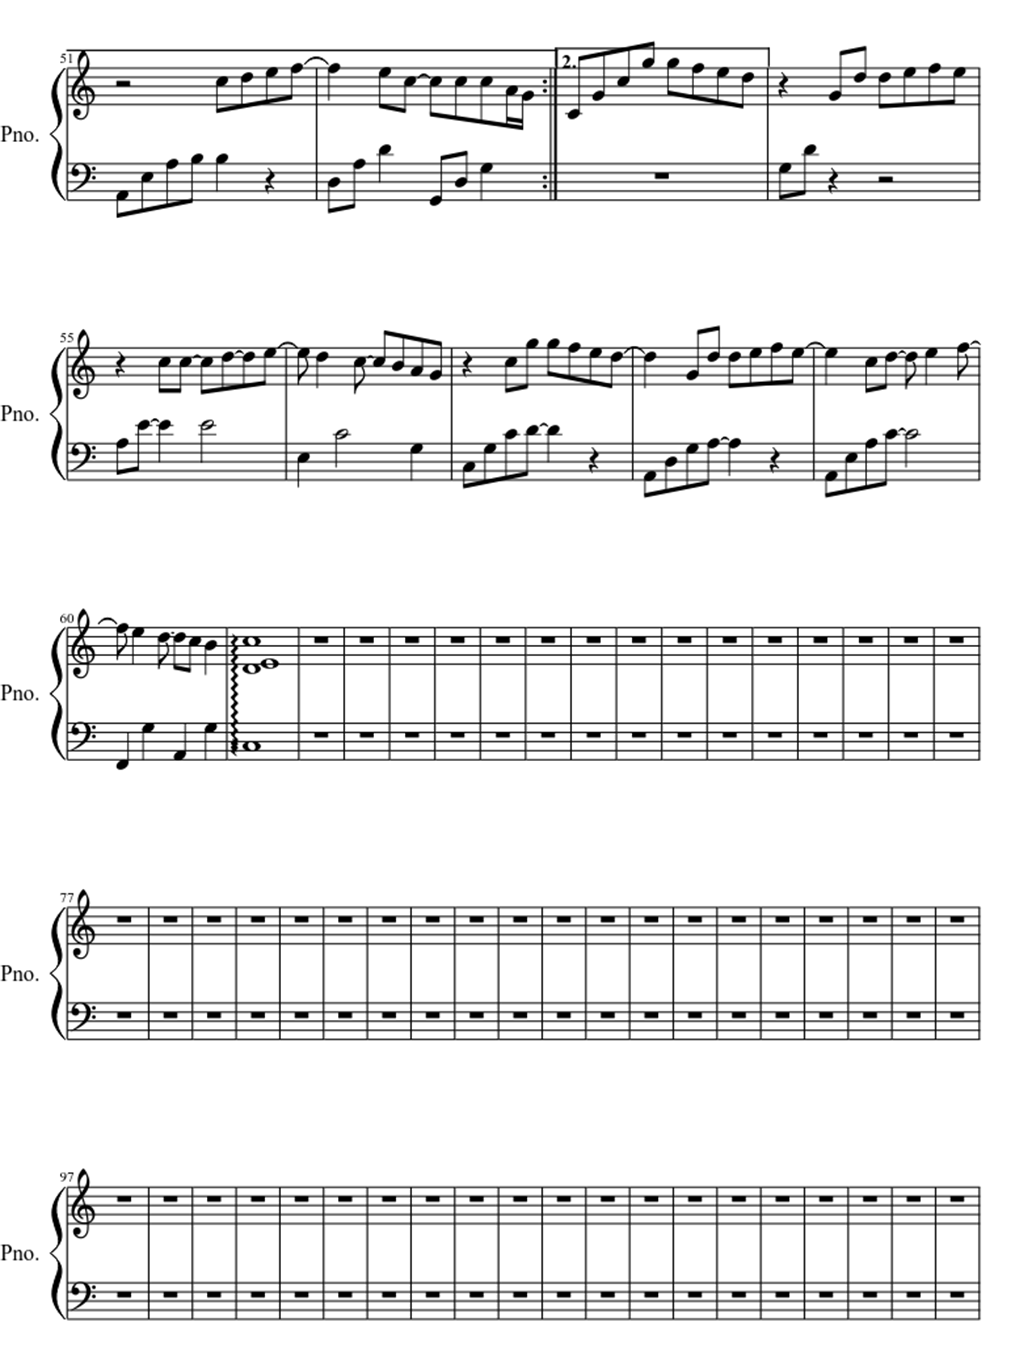 Right here waiting sheet music notes 3